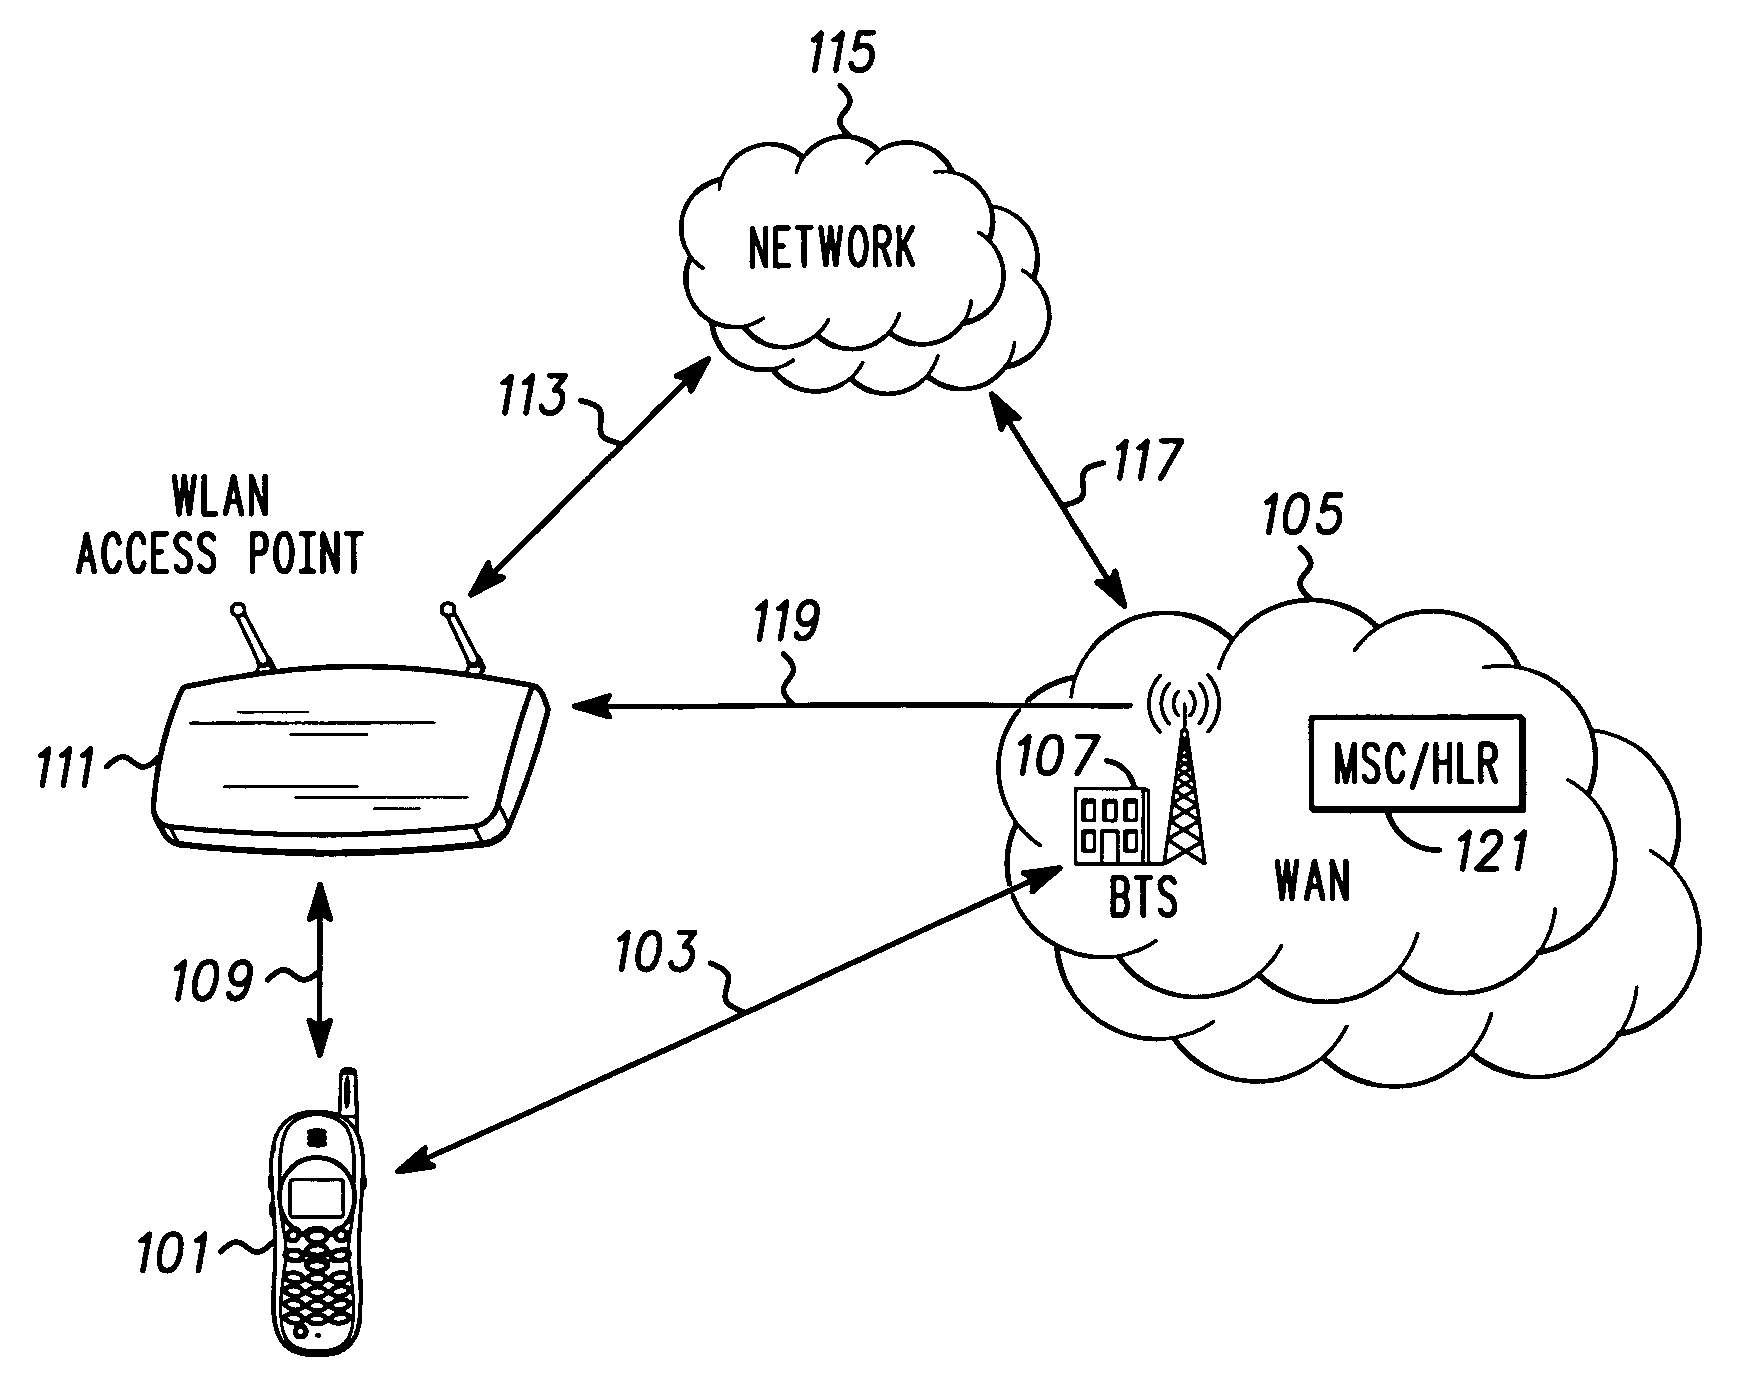 Mechanism for hand off using subscriber detection of synchronized access point beacon transmissions